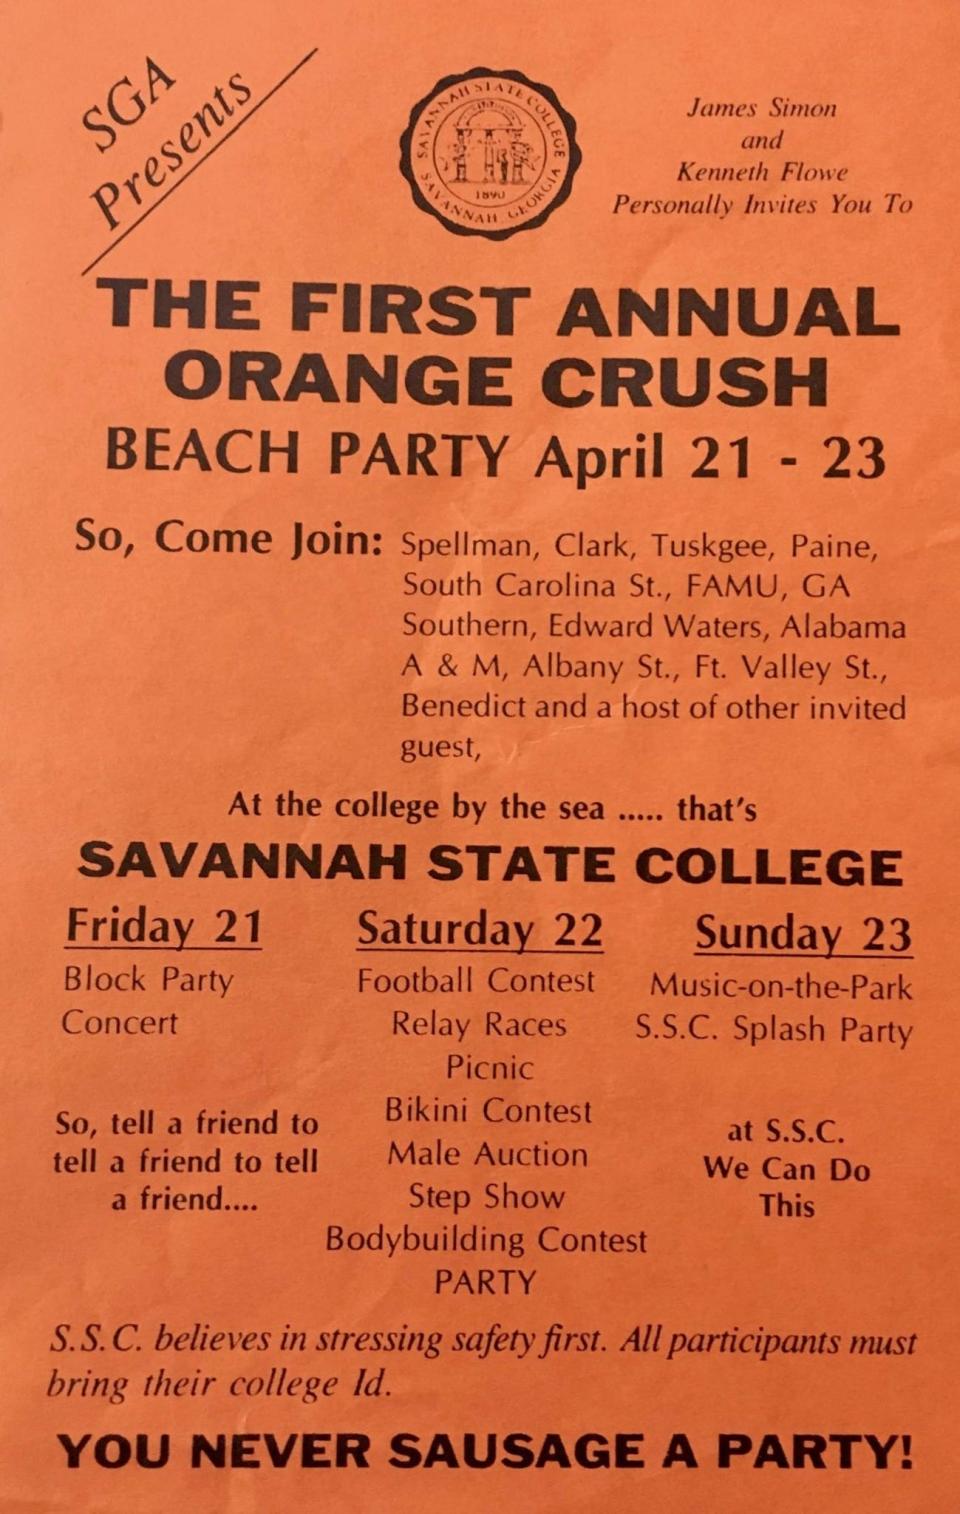 The first orange crush advertised a block party, male auctions bikini contests and more.